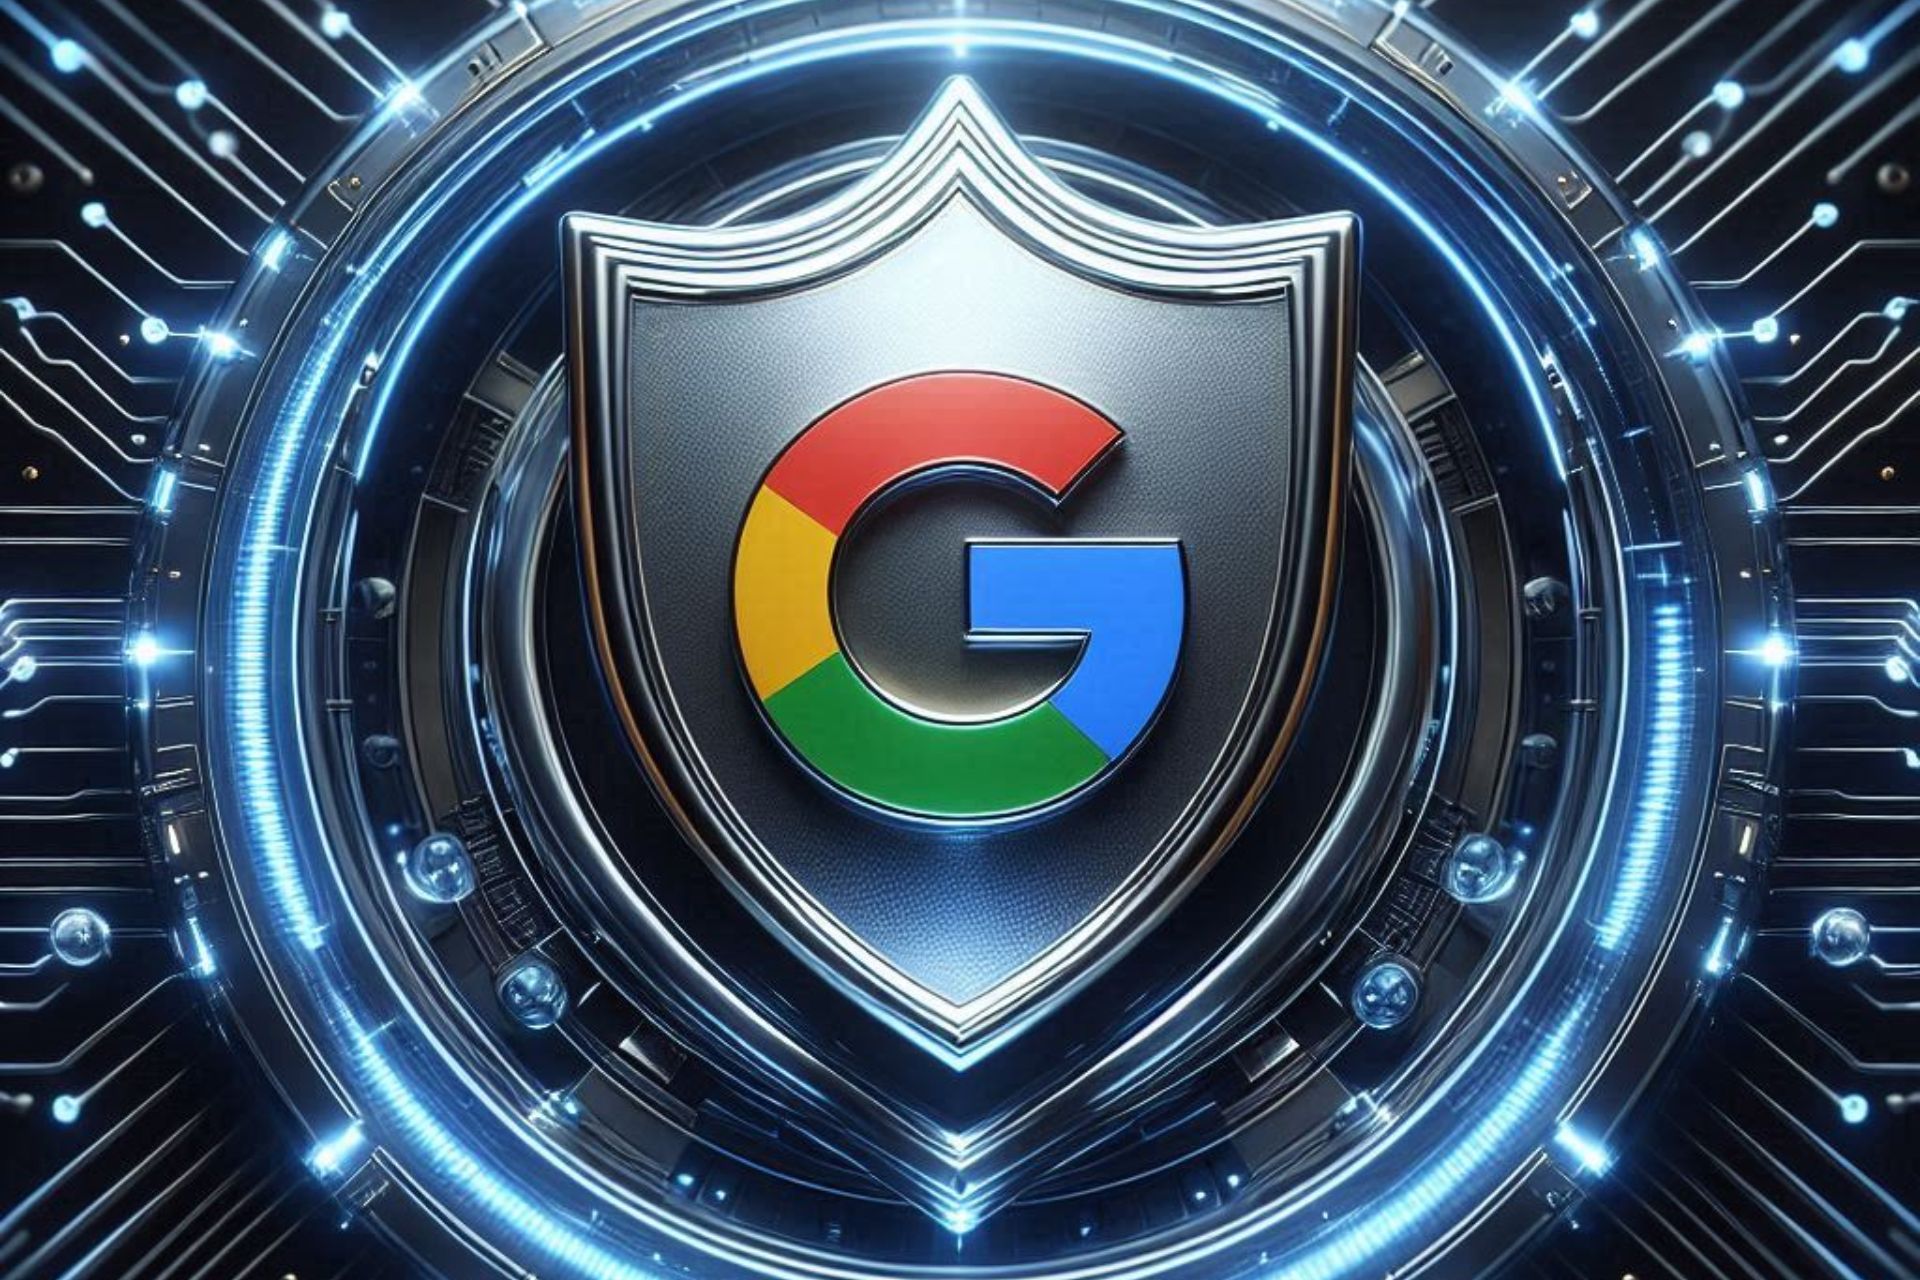 An AI generated image of a Google security shield